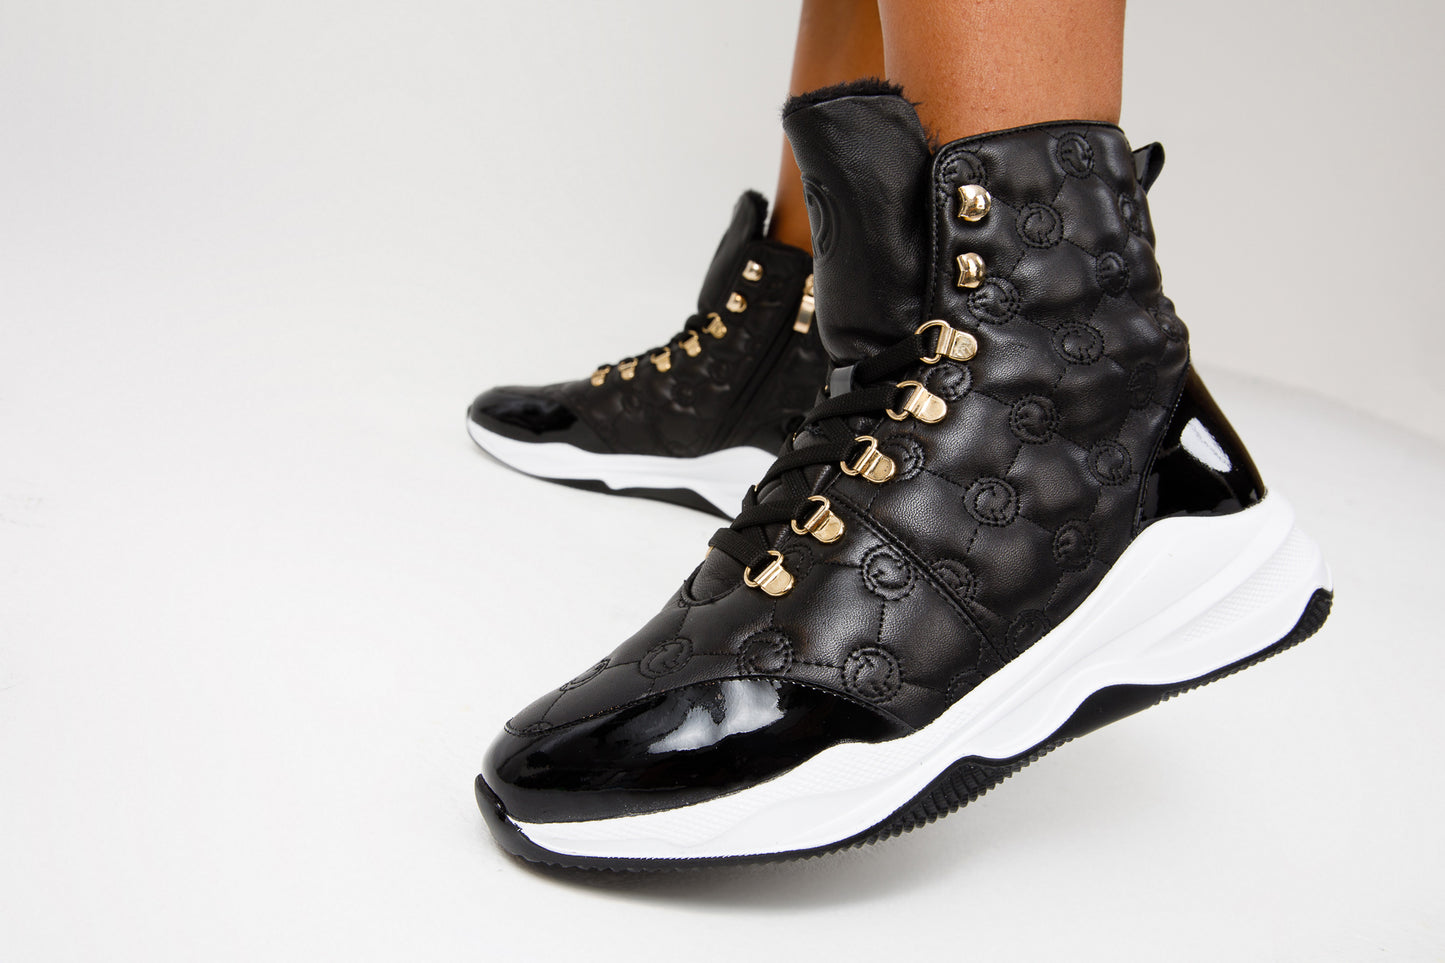 The Cambridge Black Quilted Leather Ankle Women Boot